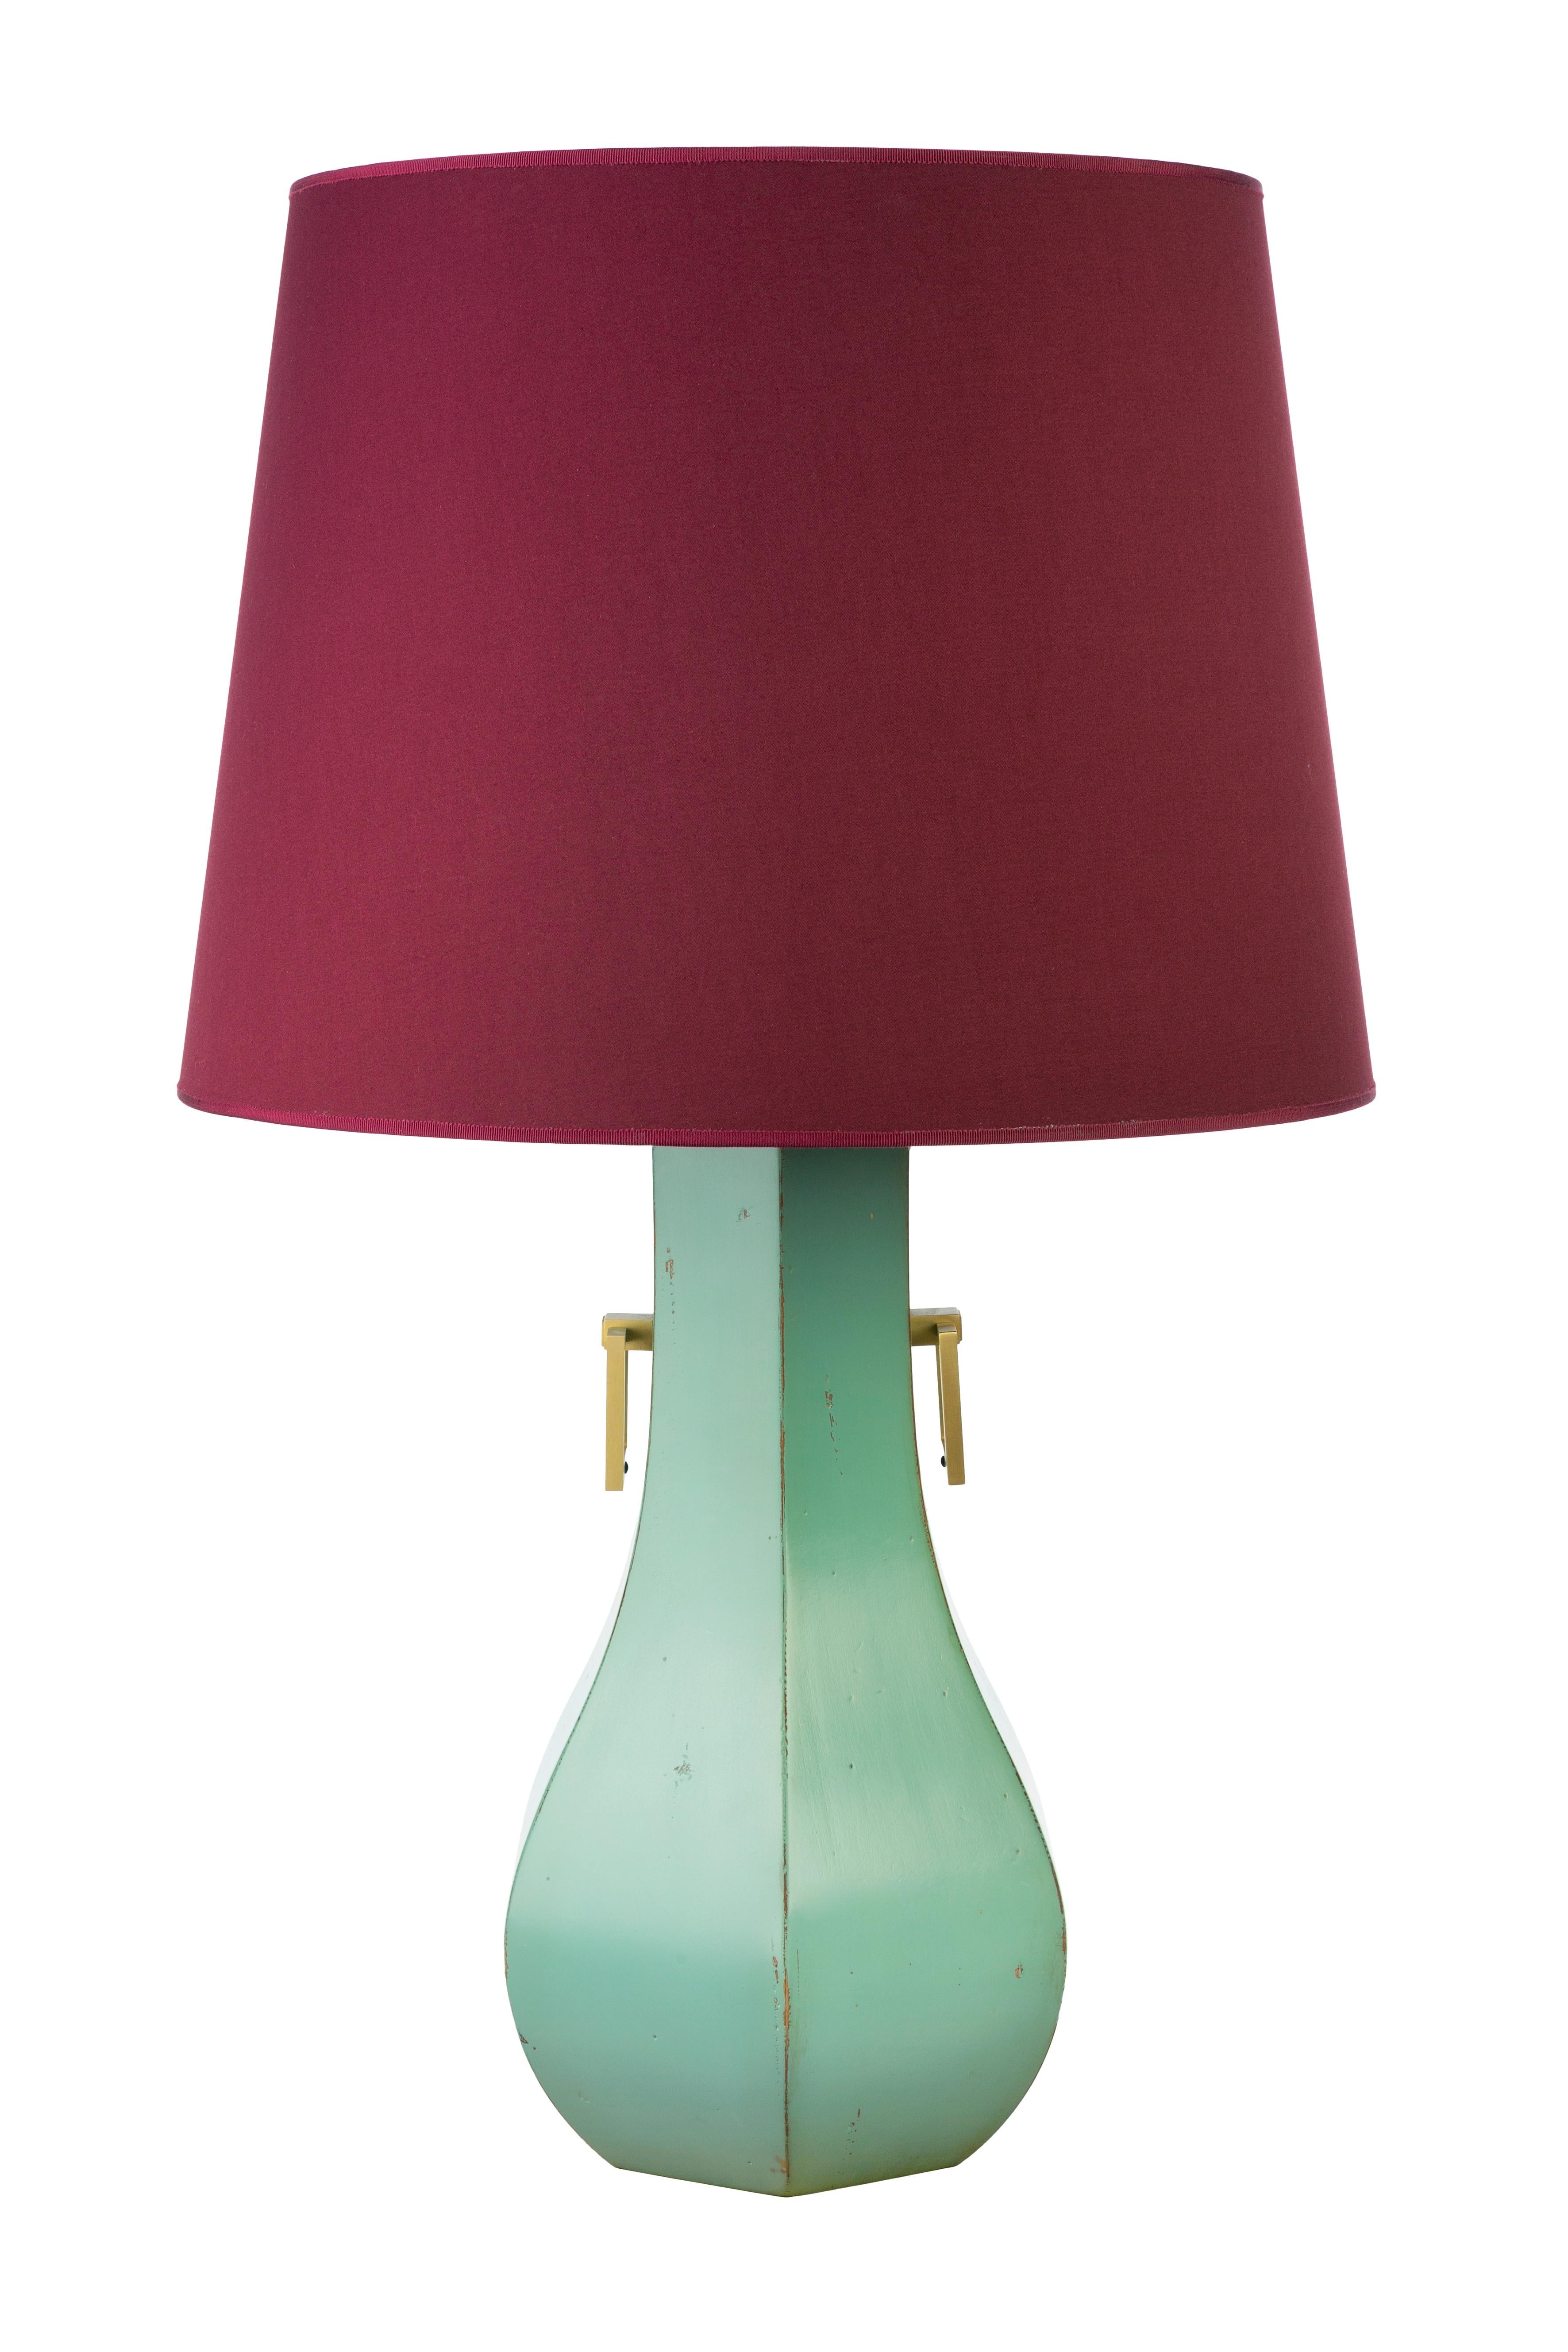 Céladon lacquered beech lamp with a turned legs in six-sided and brushed satin brass square ring handle. 
It is a piece of furniture made by hand by the craftsmen of Moissonnier, French cabinetmaker since 1885. Our craftsmen use ancestral know-how